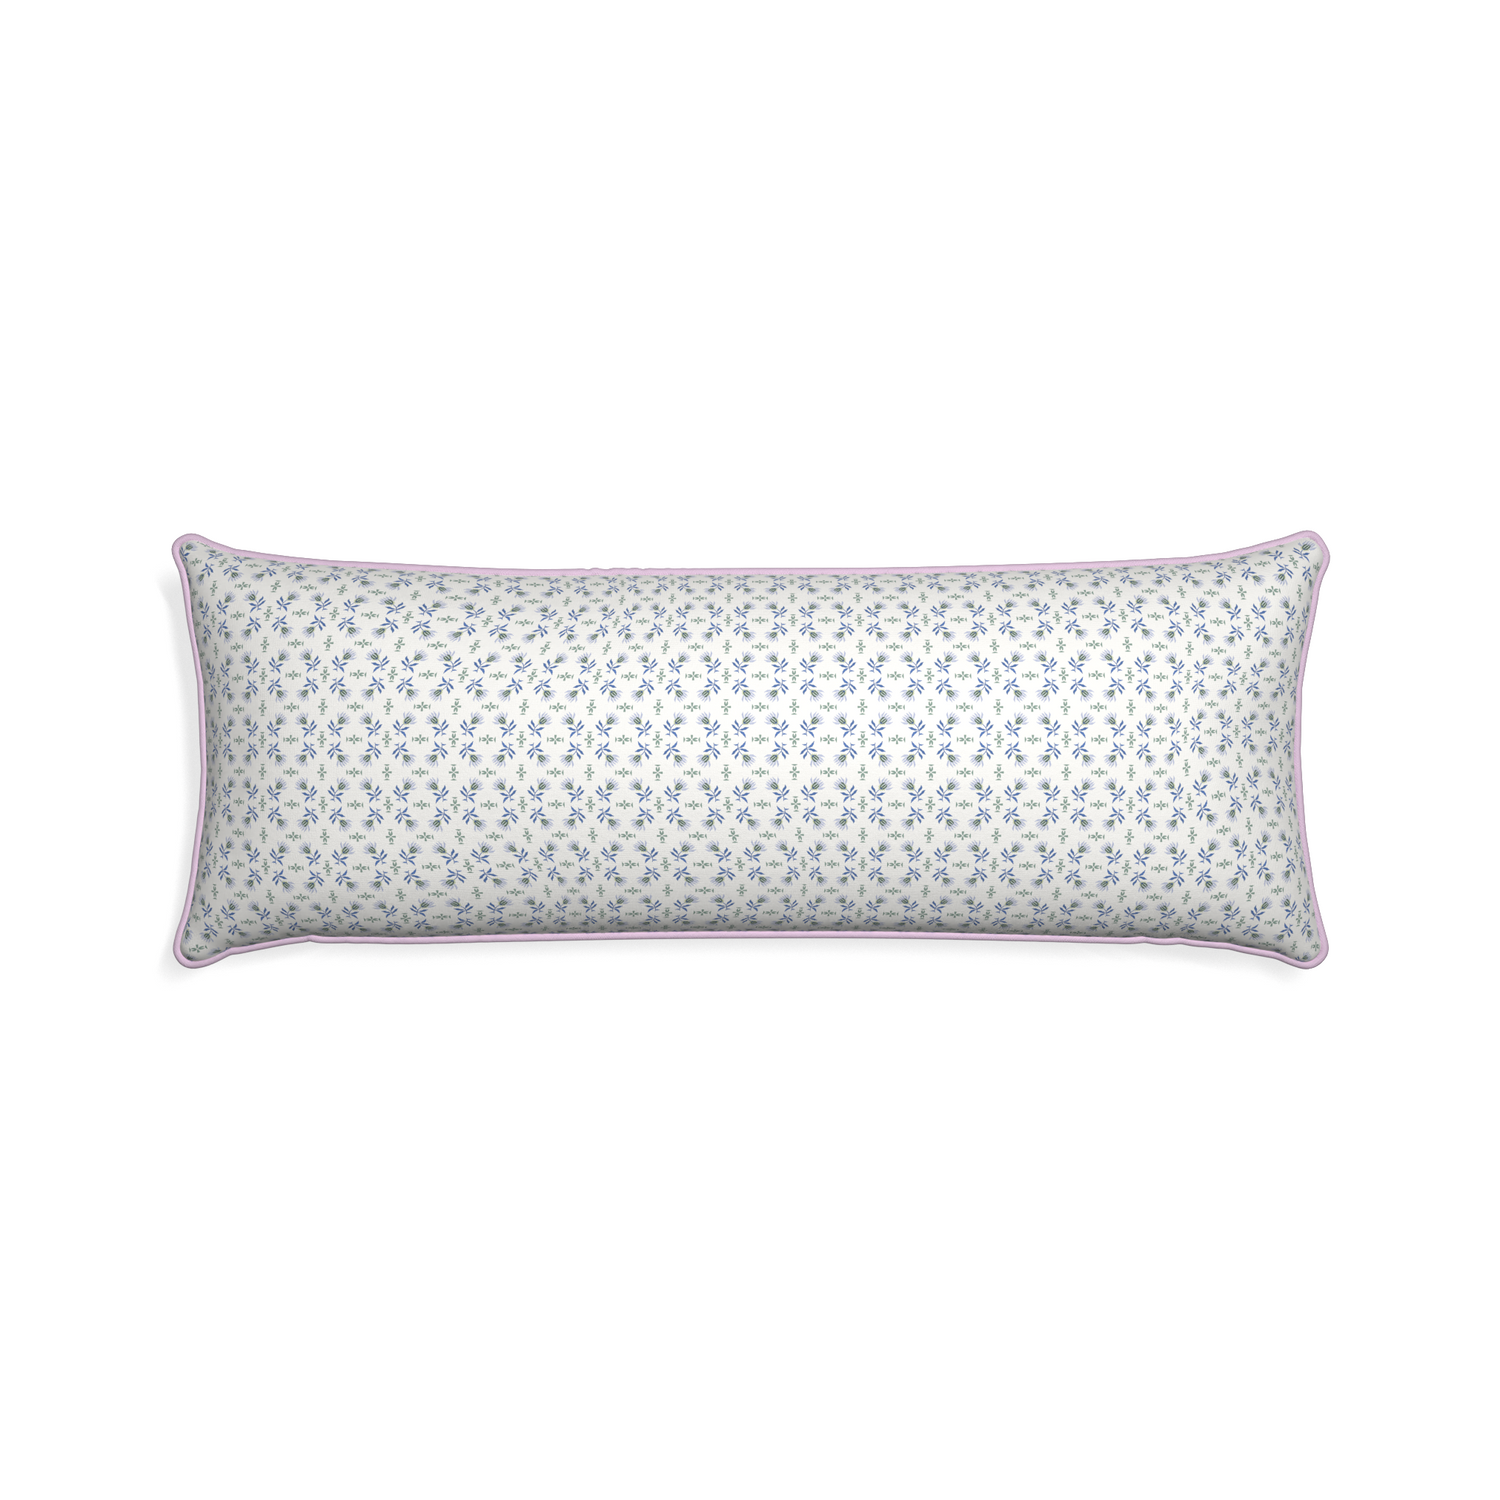 Xl-lumbar lee custom pillow with l piping on white background